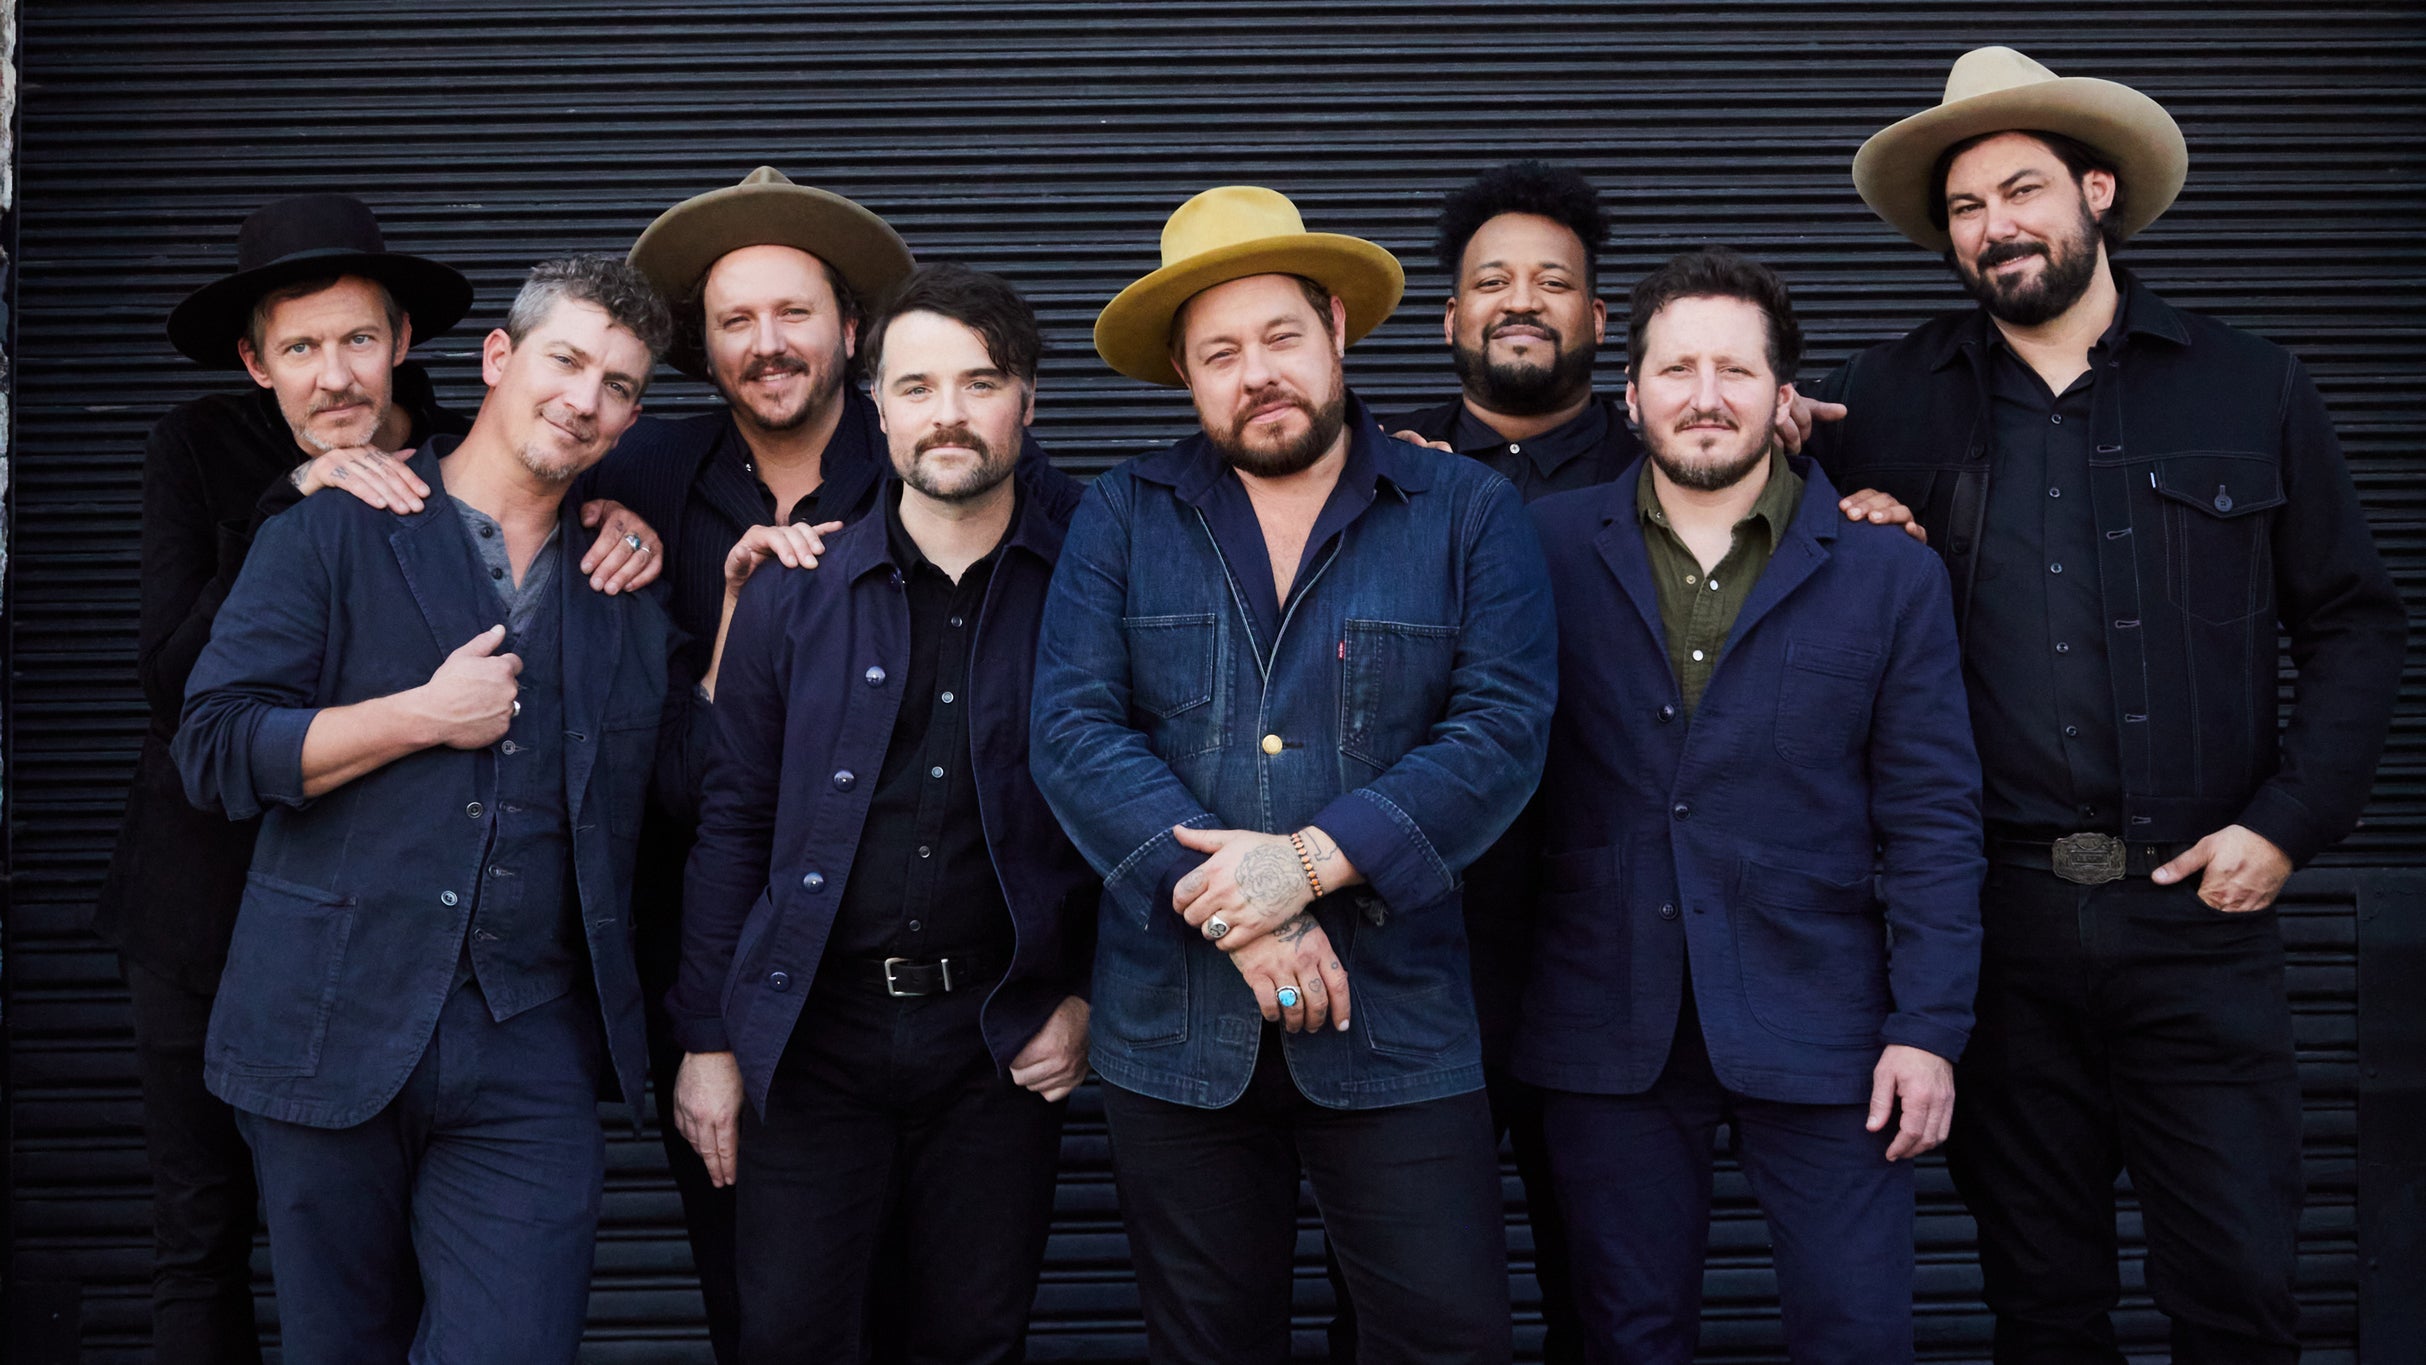 Eye To Eye Tour - Nathaniel Rateliff & TNS and My Morning Jacket in Nashville promo photo for Official Platinum presale offer code